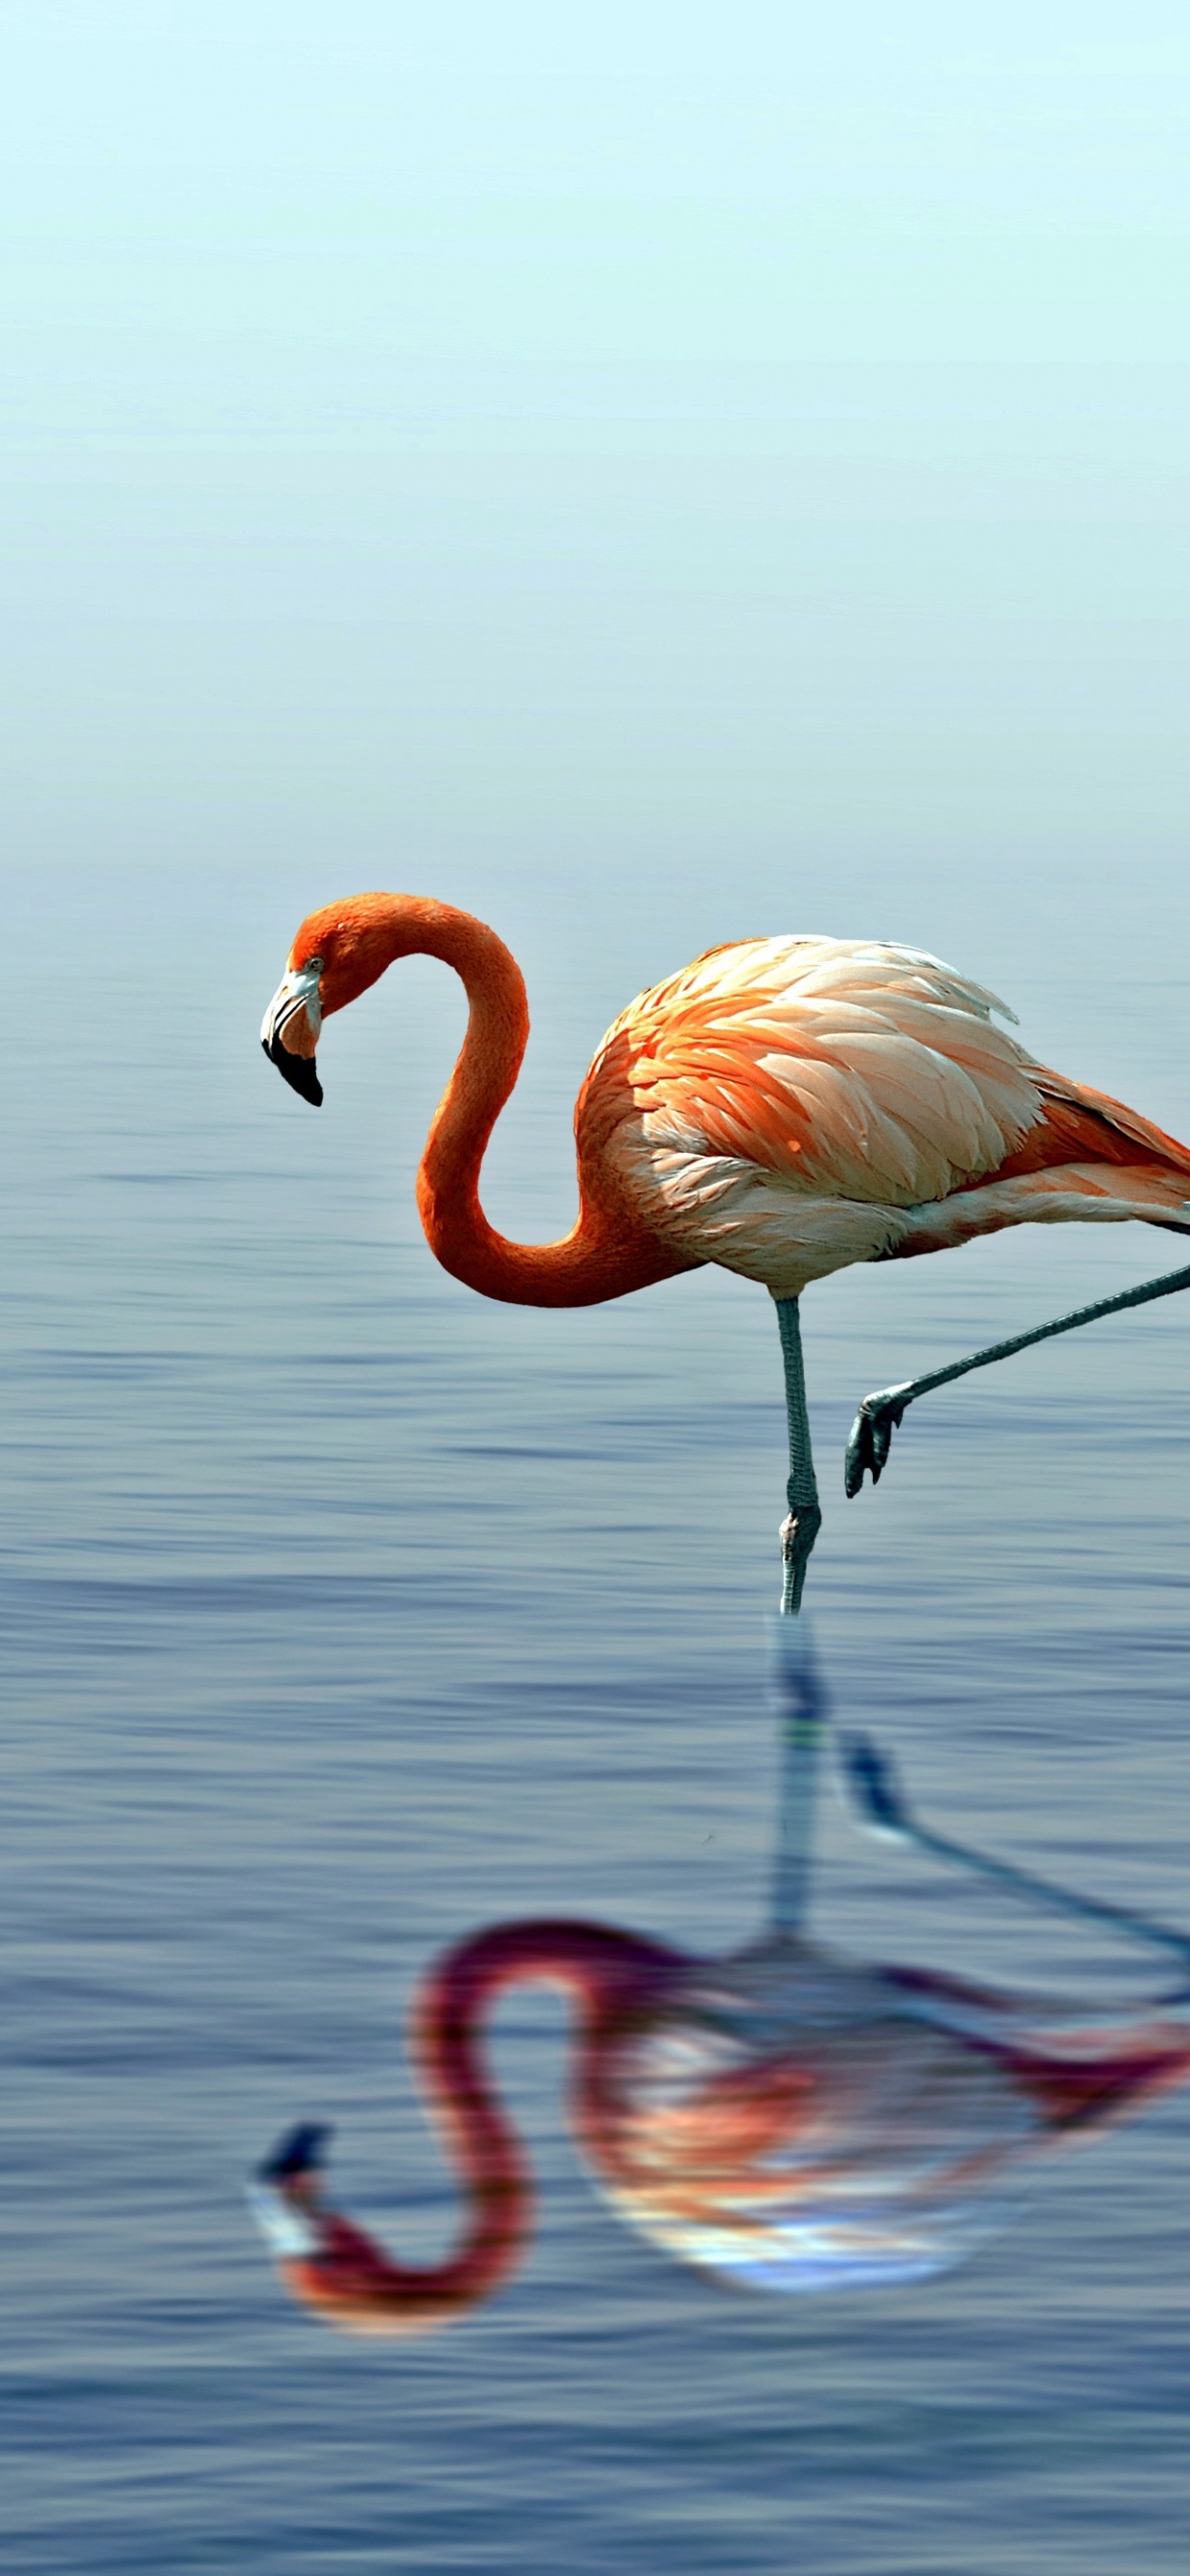 Pink Flamingo on Water During Daytime. Wallpaper in 1242x2688 Resolution